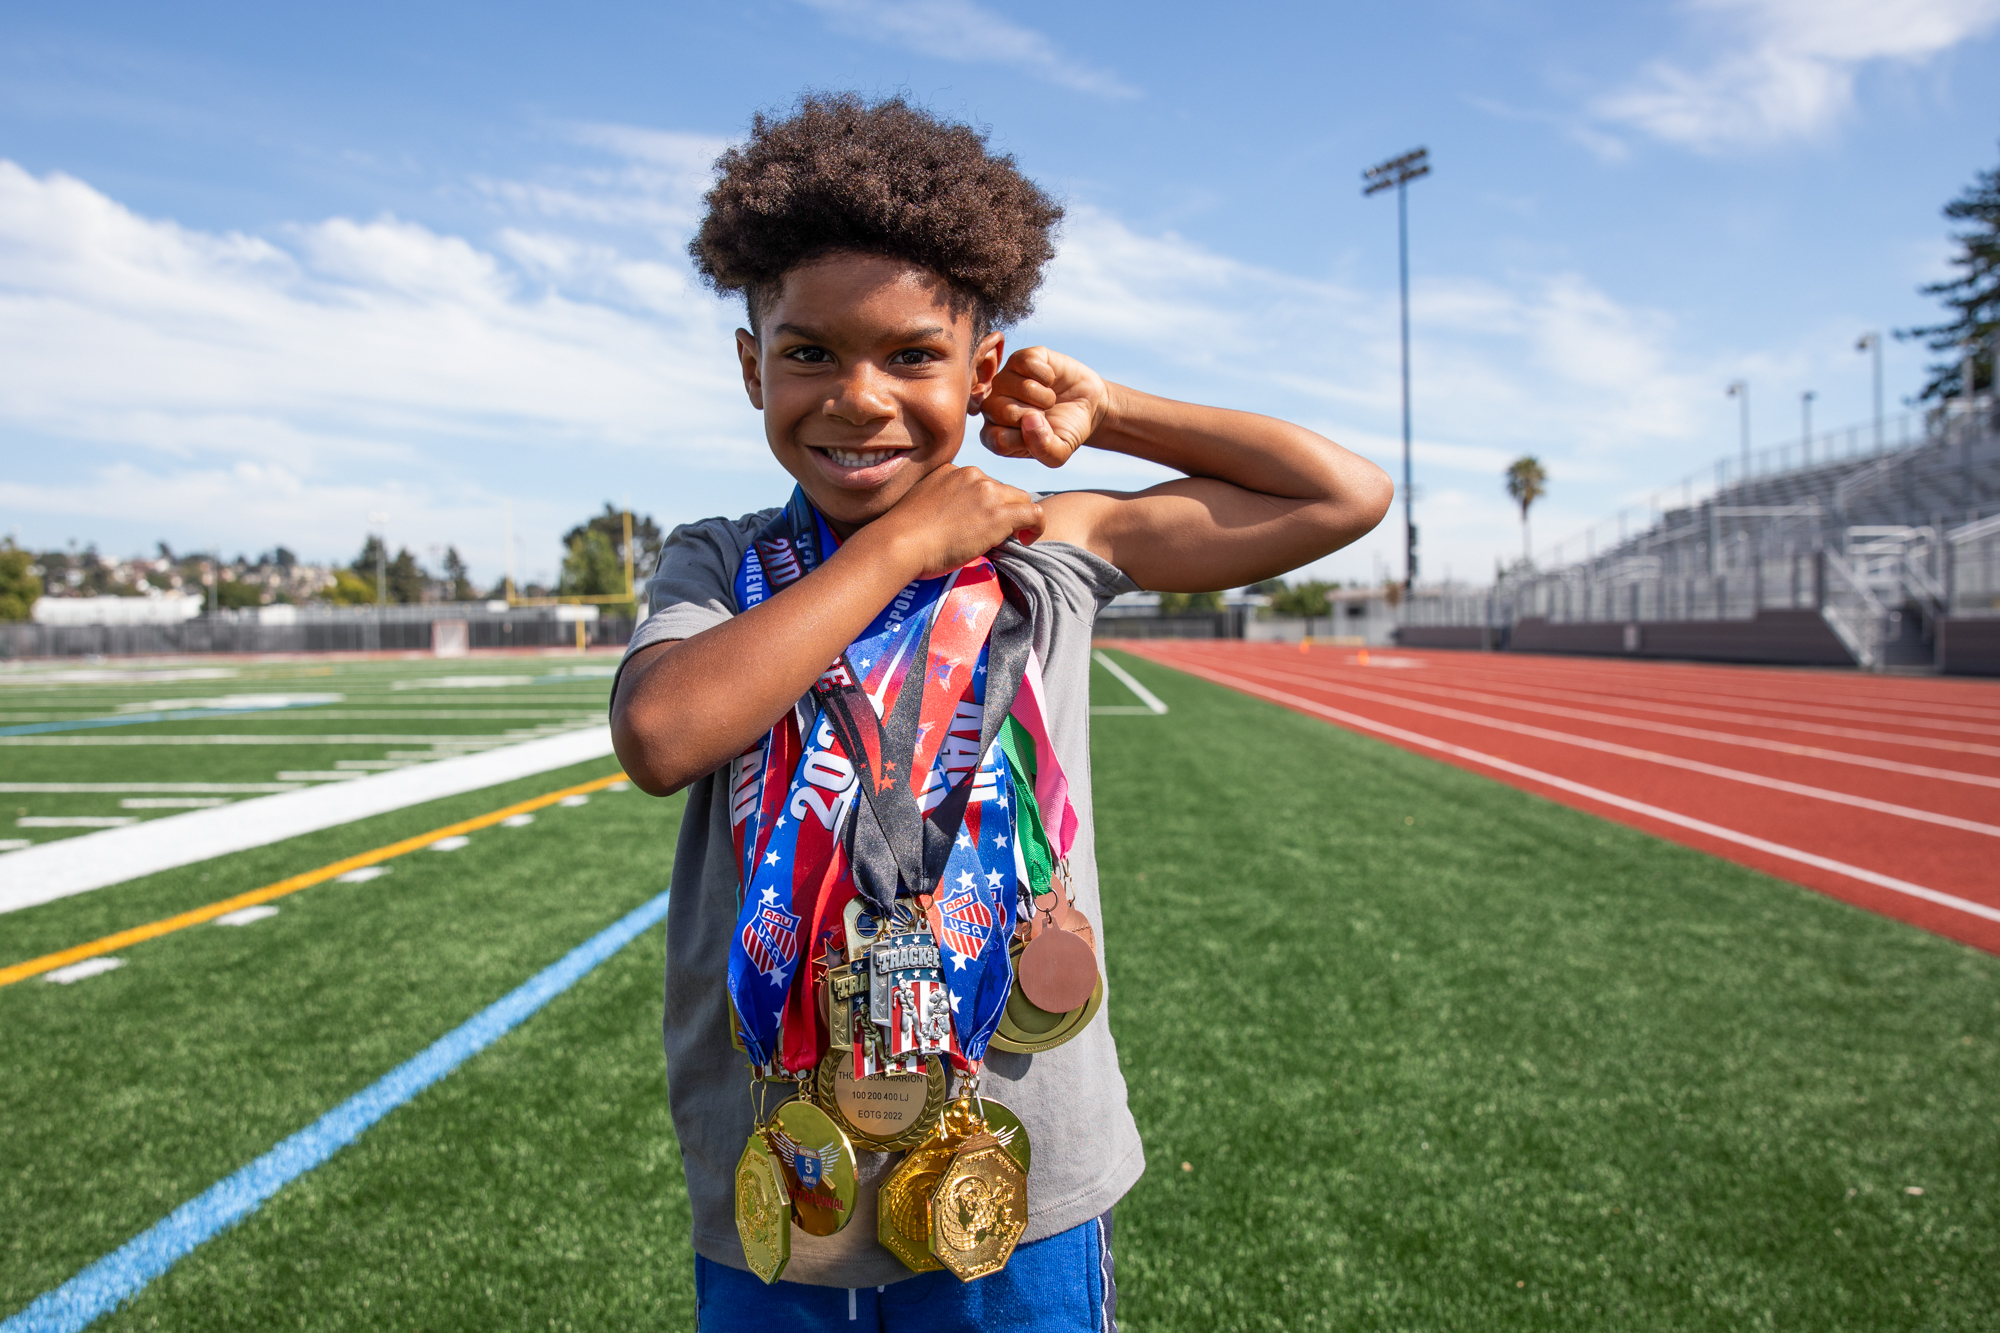 A boy flexes his bicep muscle while posing for a photo with over ten medals hanging from around his neck.